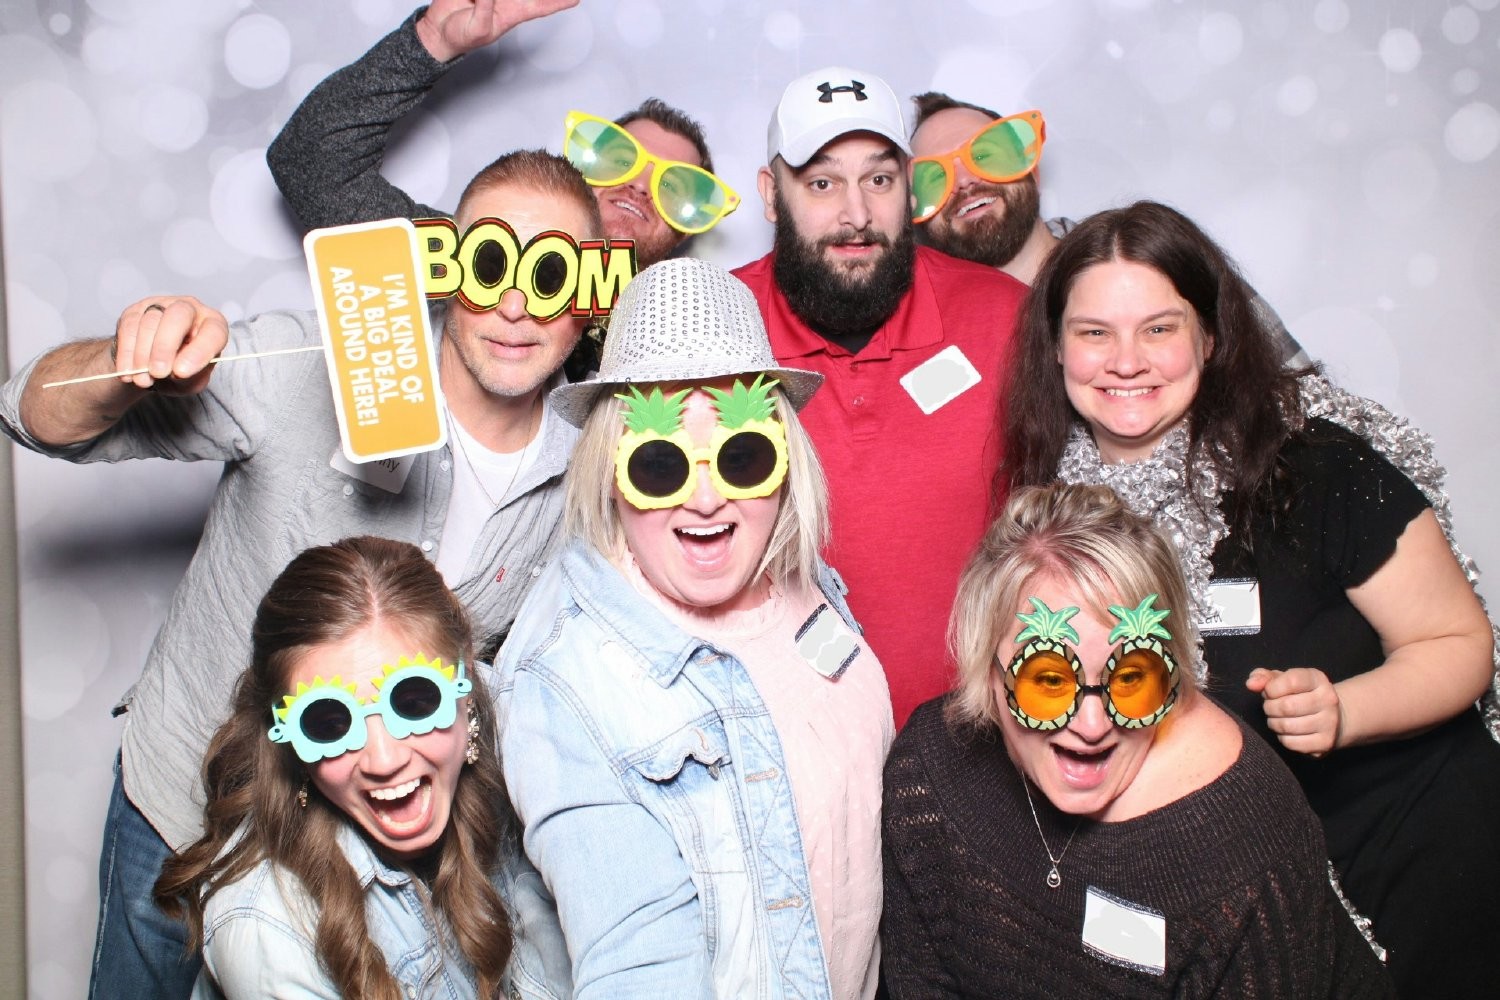 Team members celebrate during our companywide party by having some fun in the photo booth. 